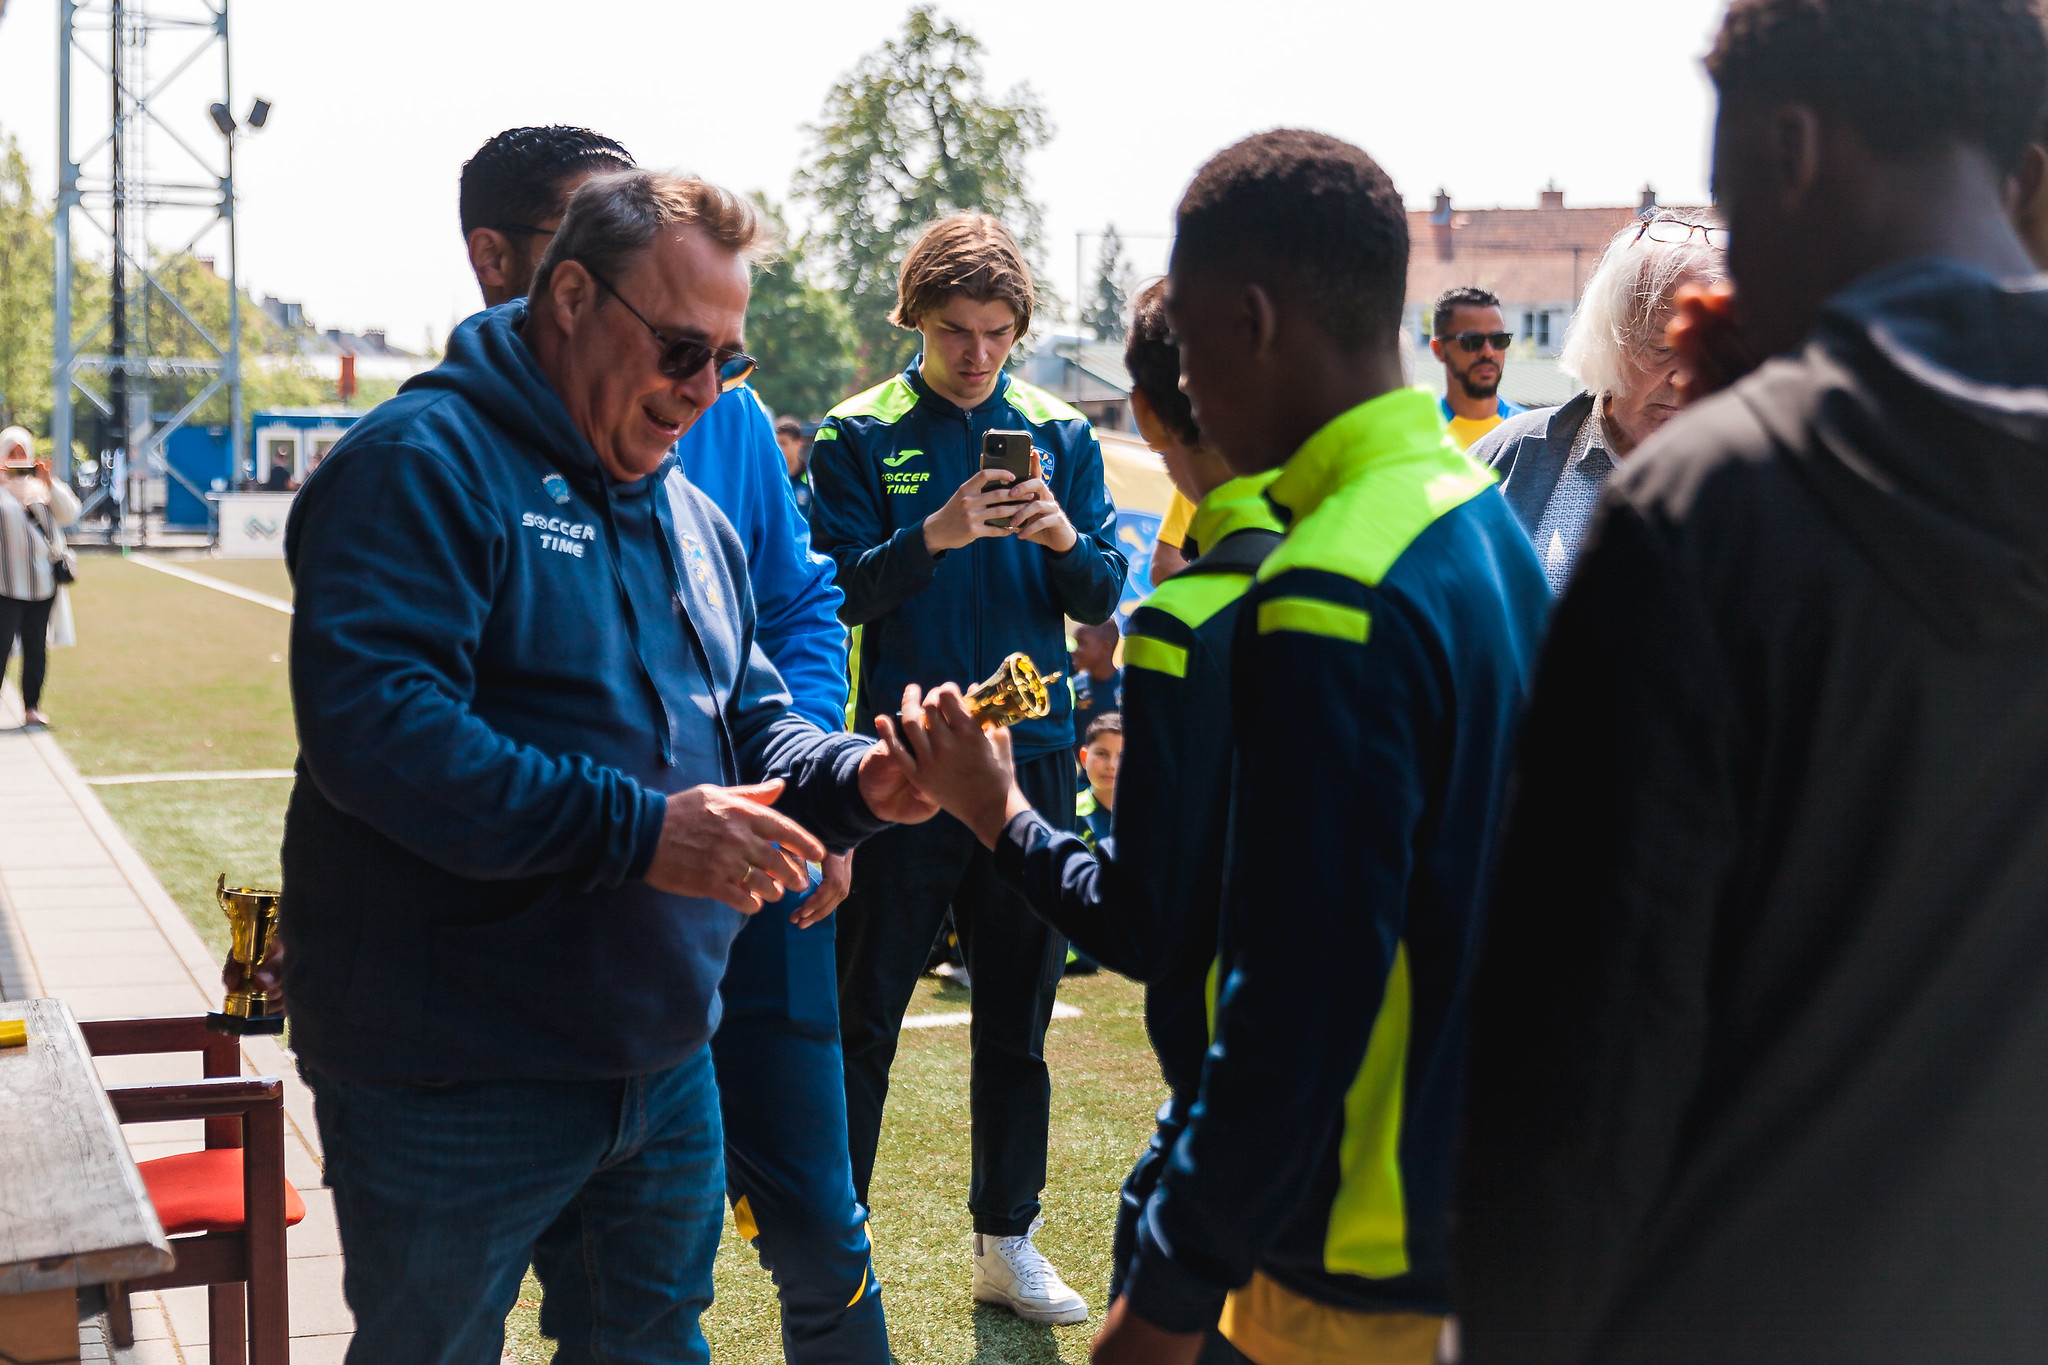 Michel Pradolini handing trophees to youth players during the Pirates Parade